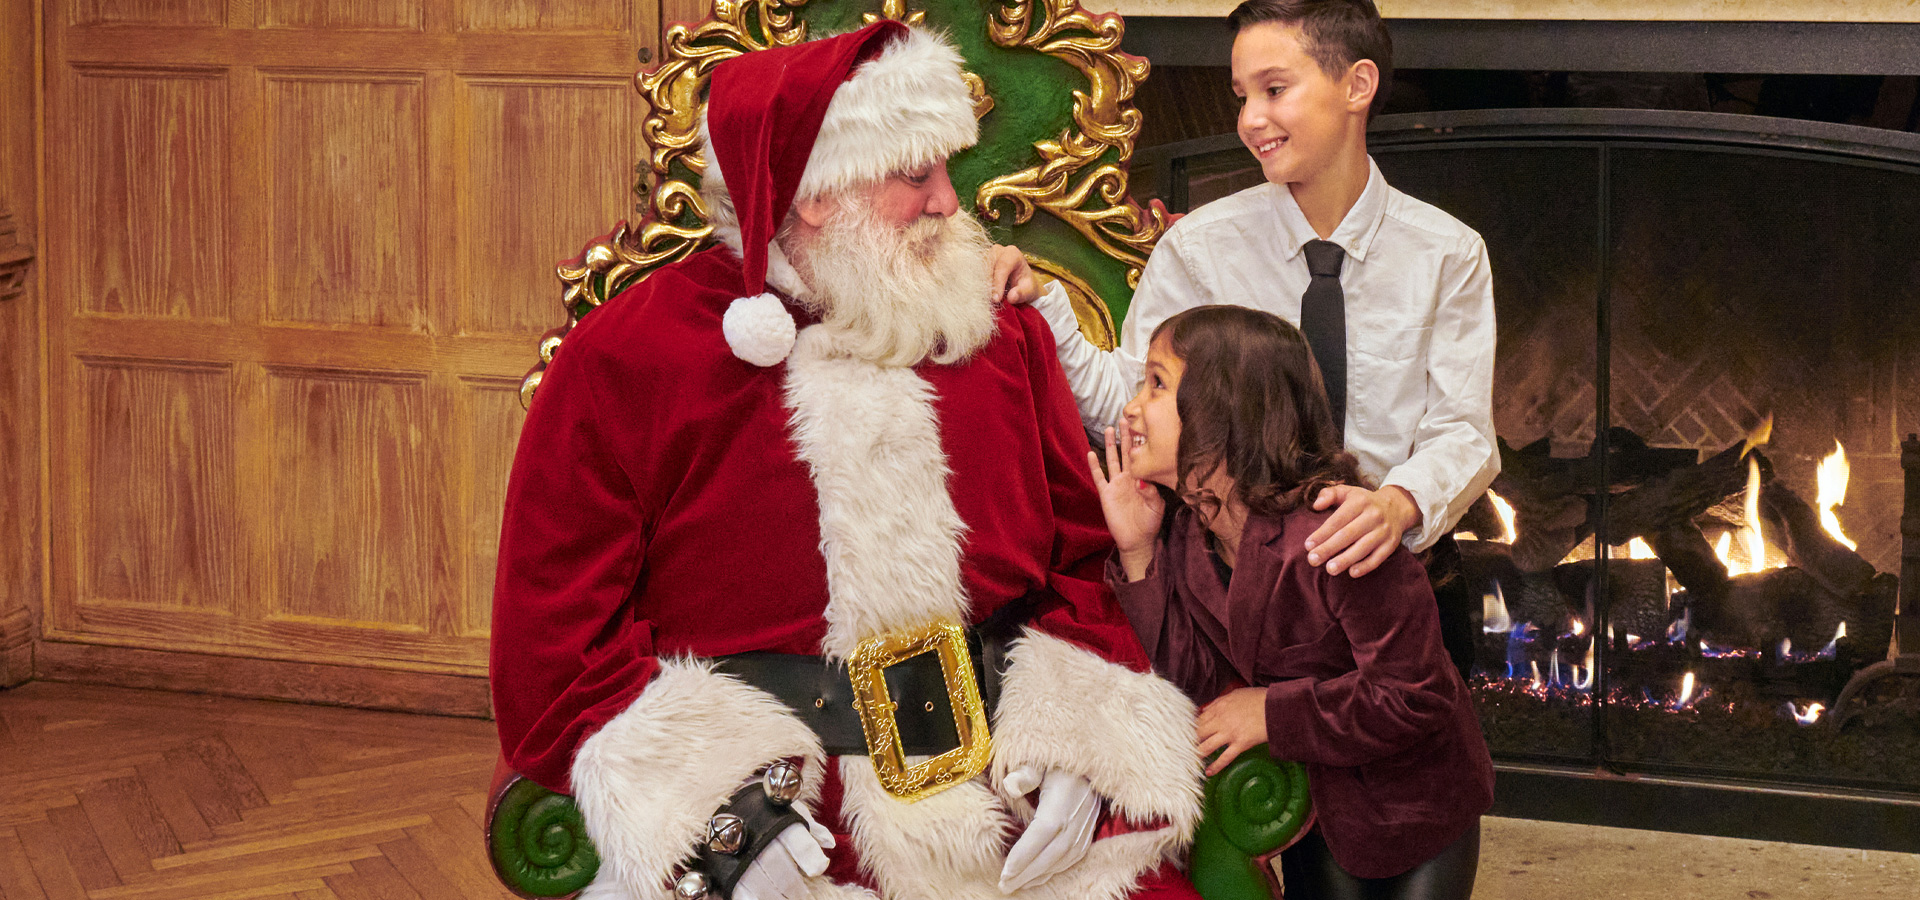 Children tell Santa what they want for Christmas